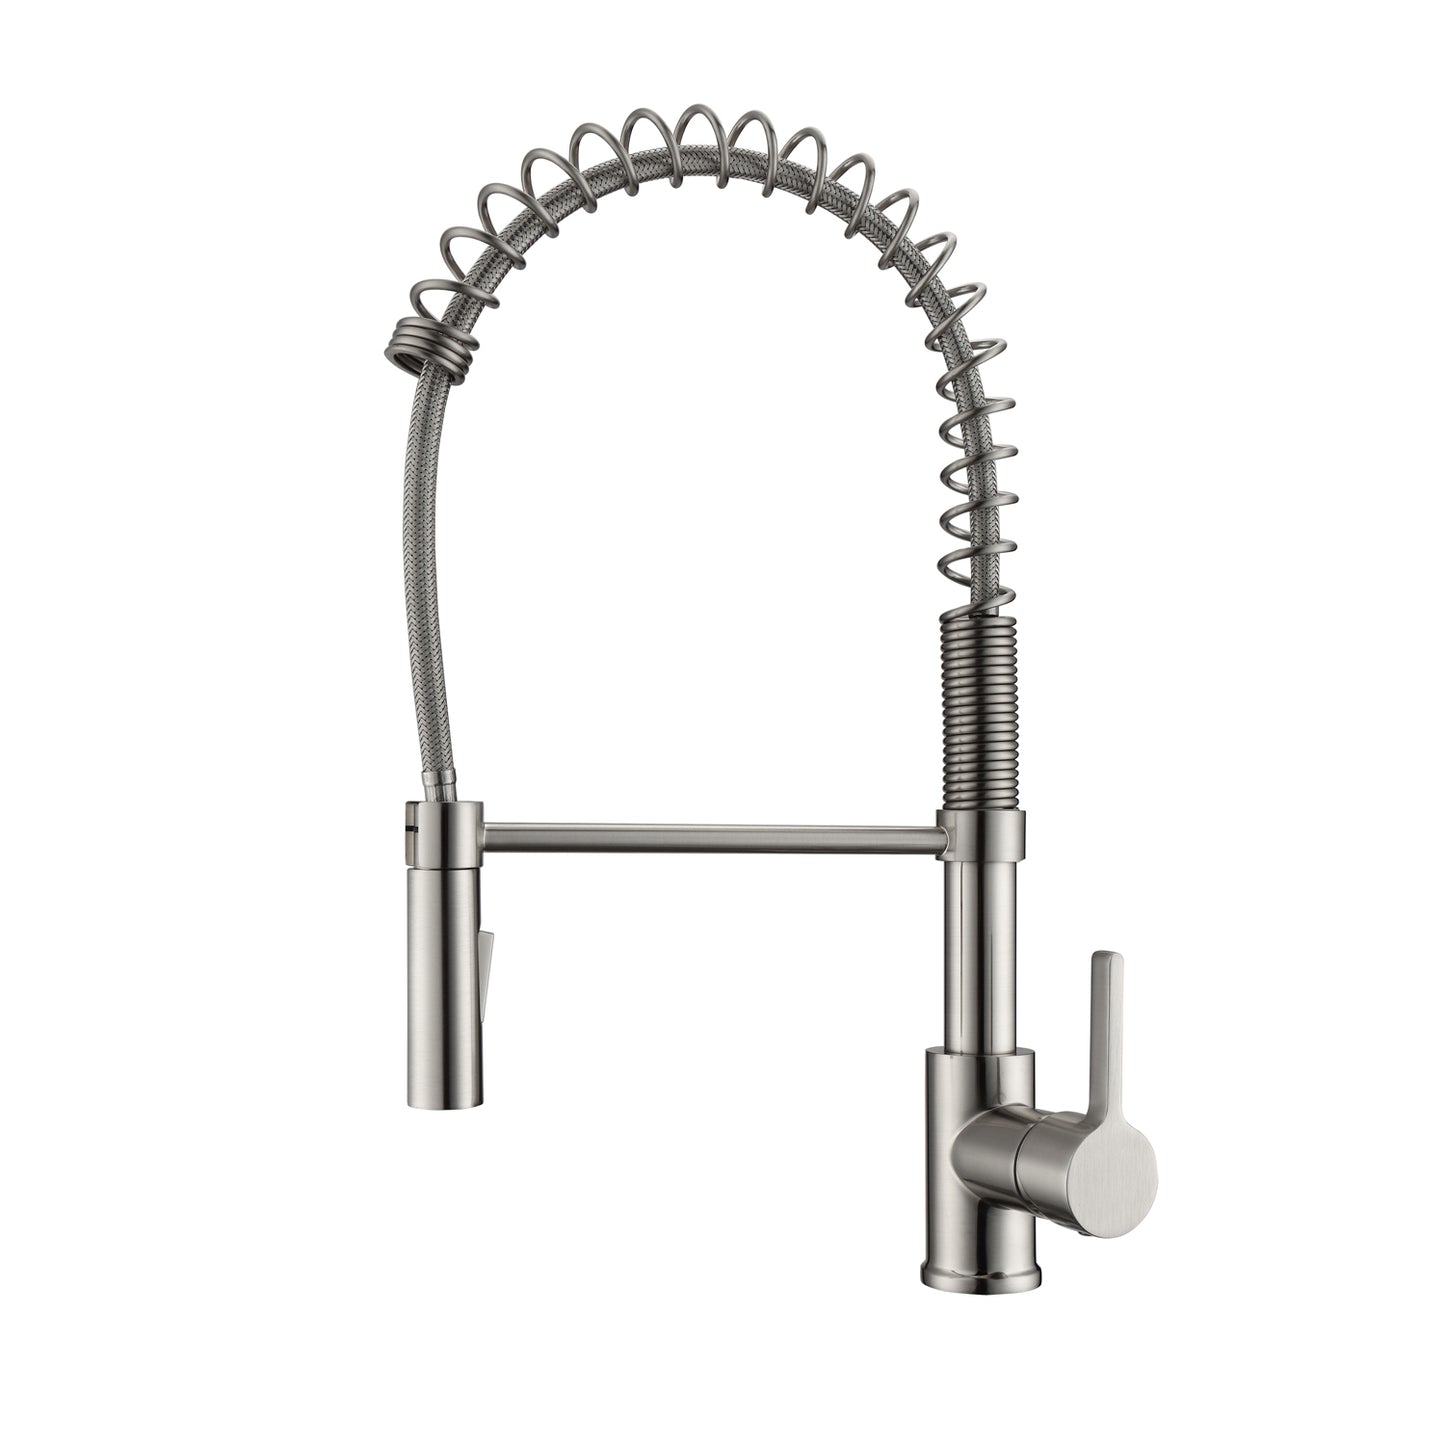 Nikita 1 Kitchen Faucet, Spring, Pull-out Sprayer, Lever Handle, Brushed Nickel